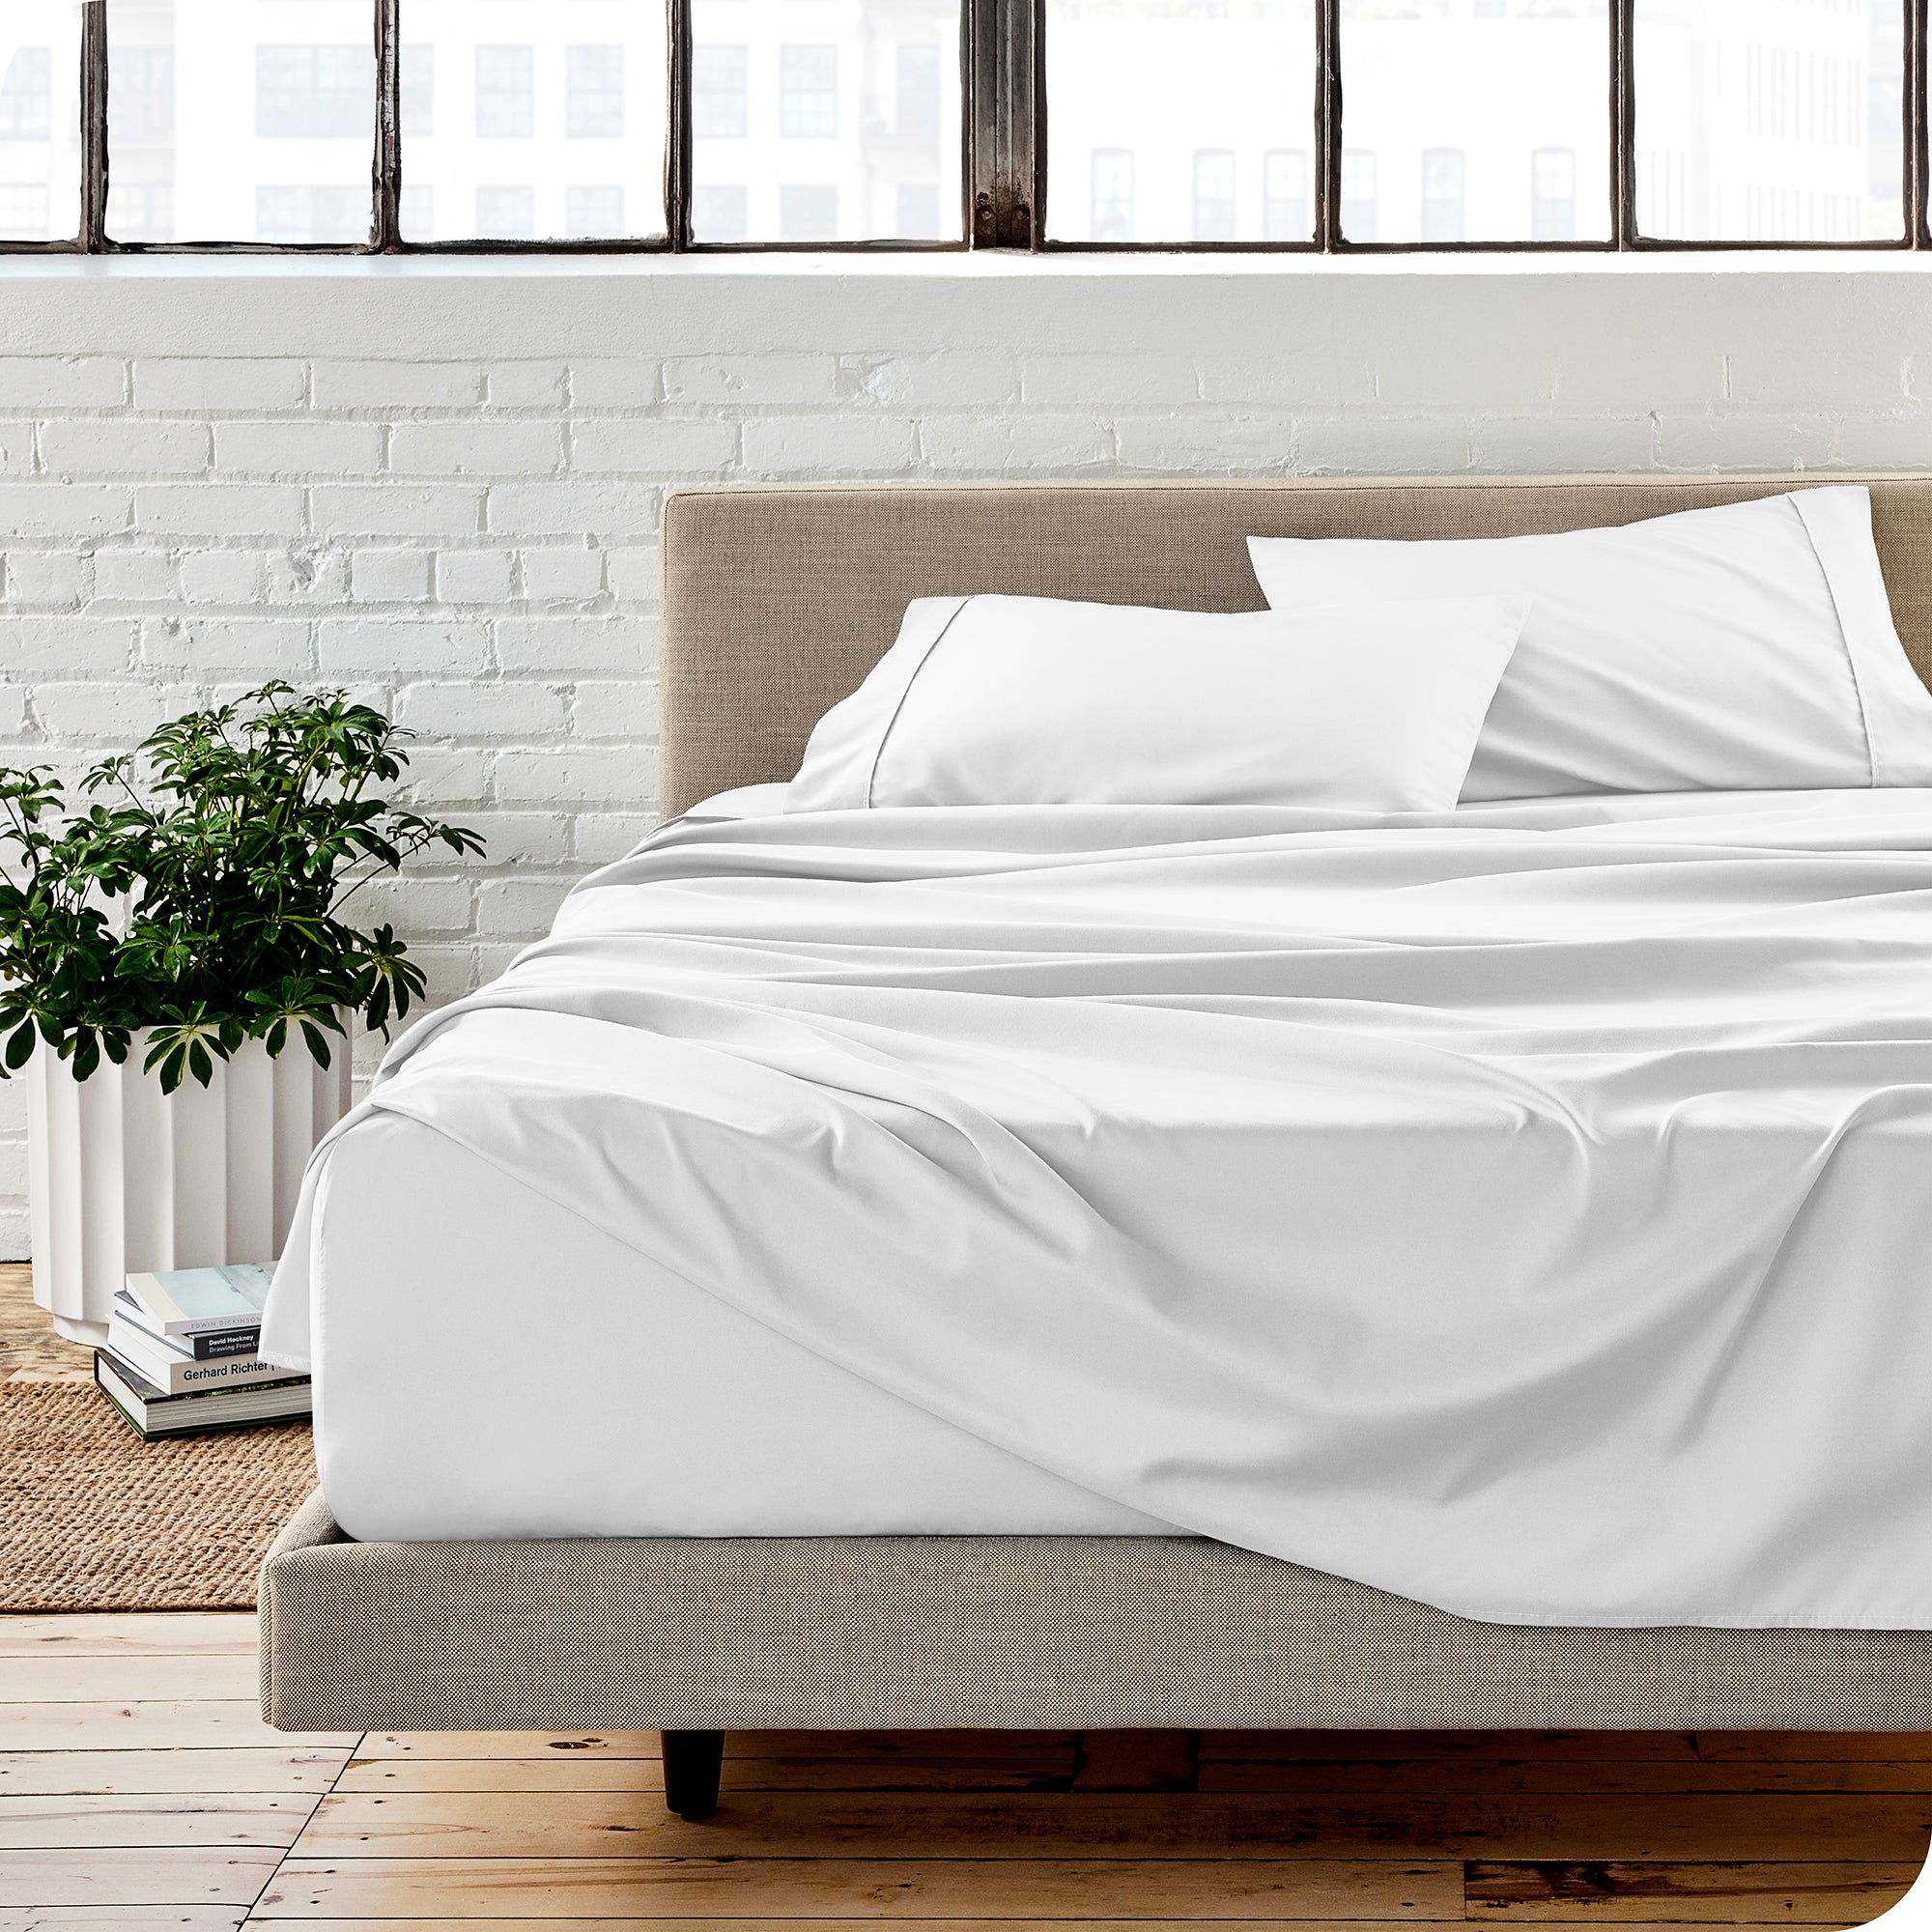 A modern bedroom with white sheets on the the bed with matching pillowcases